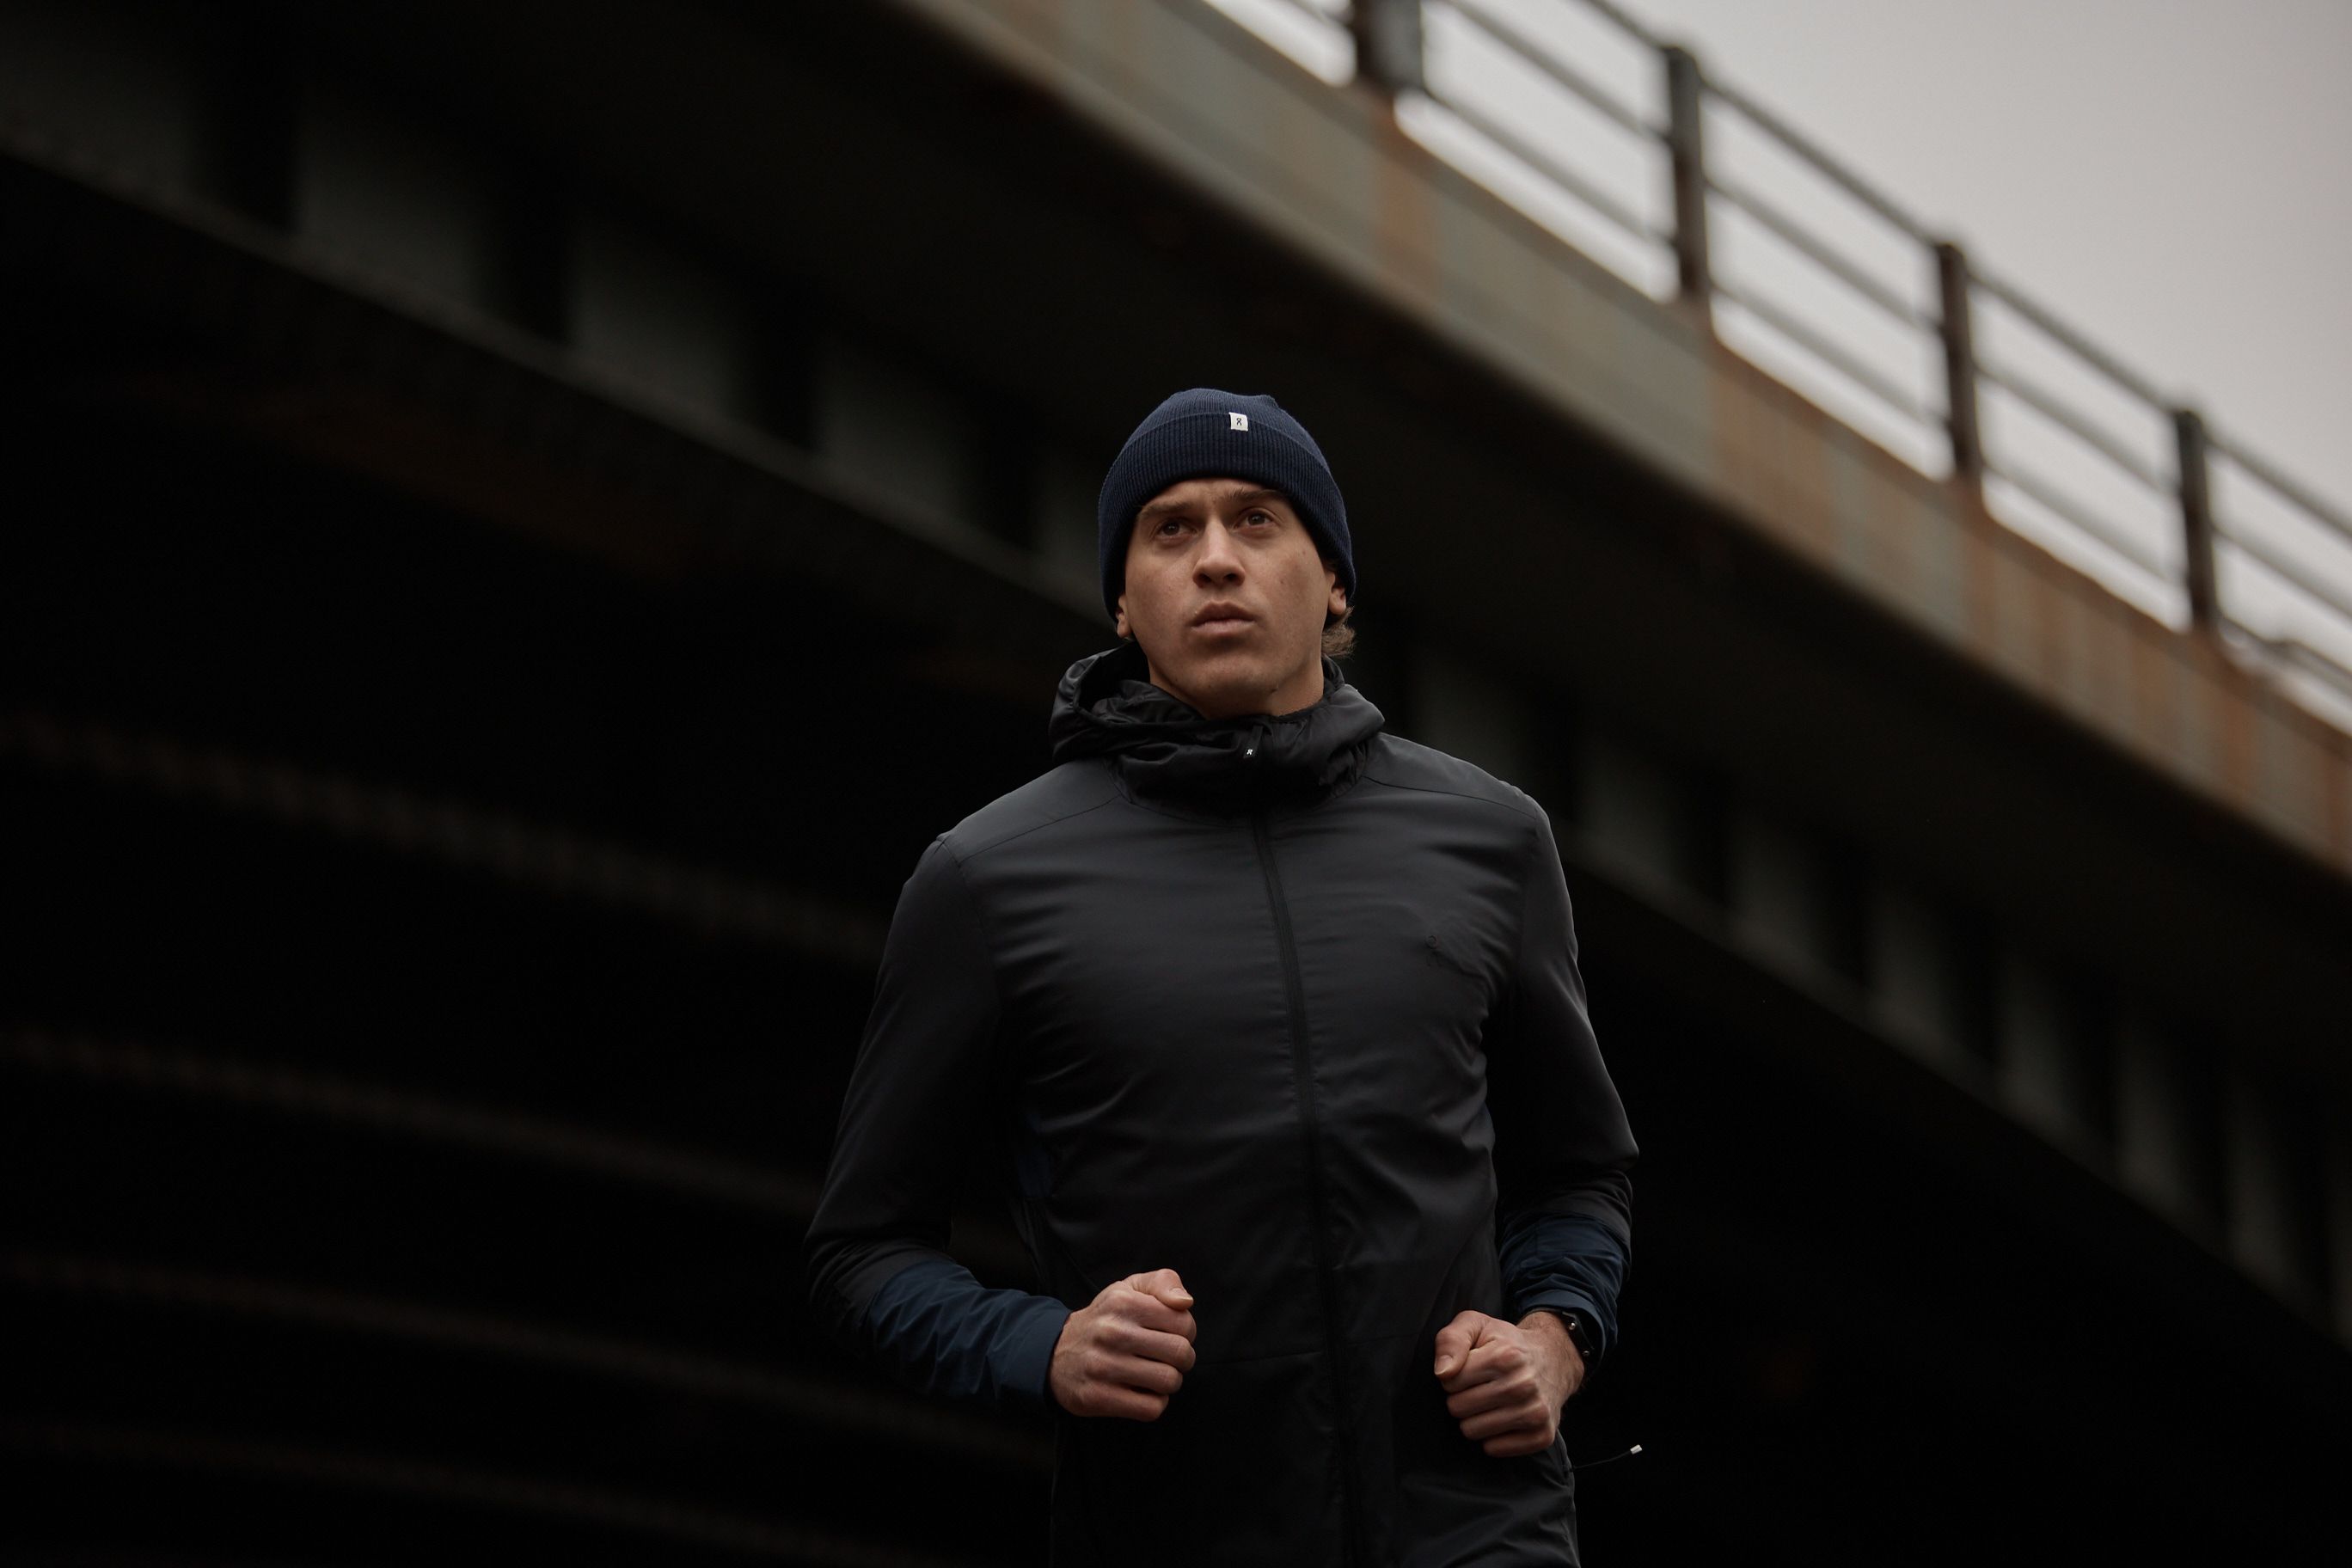 With On's Winter Running Kit, Freezing Temps Are No Match